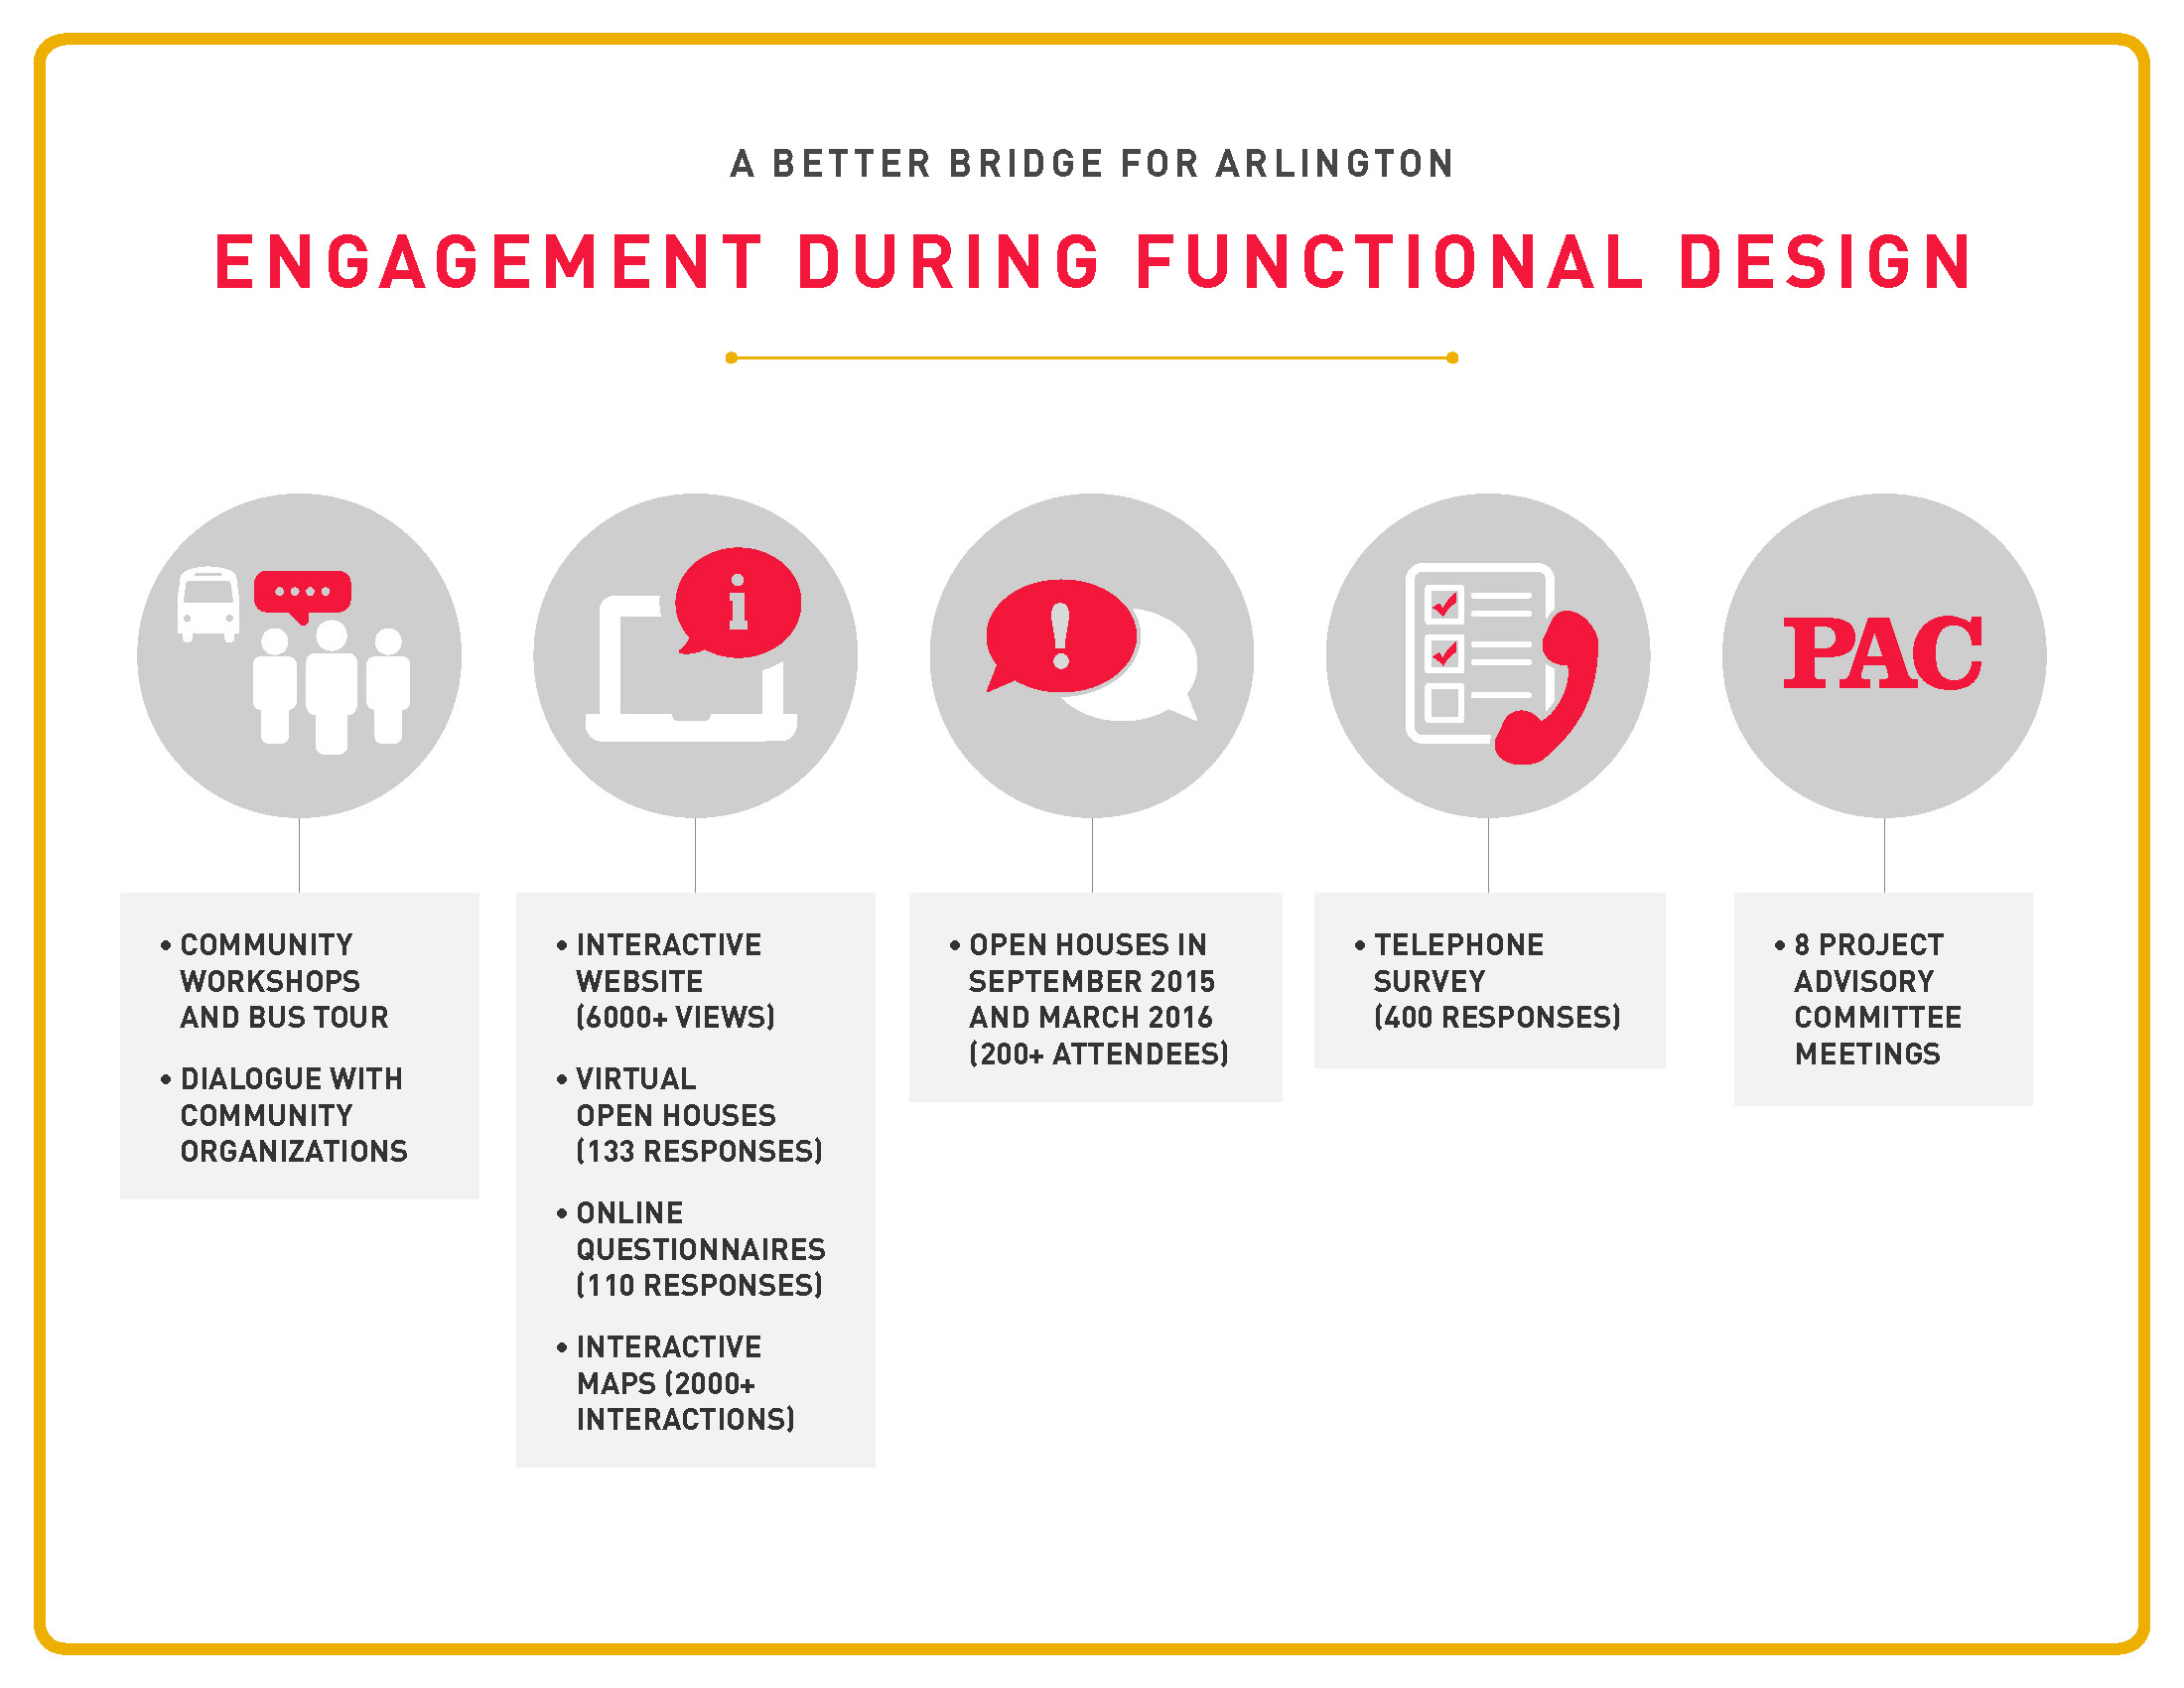 Engagement during functional design